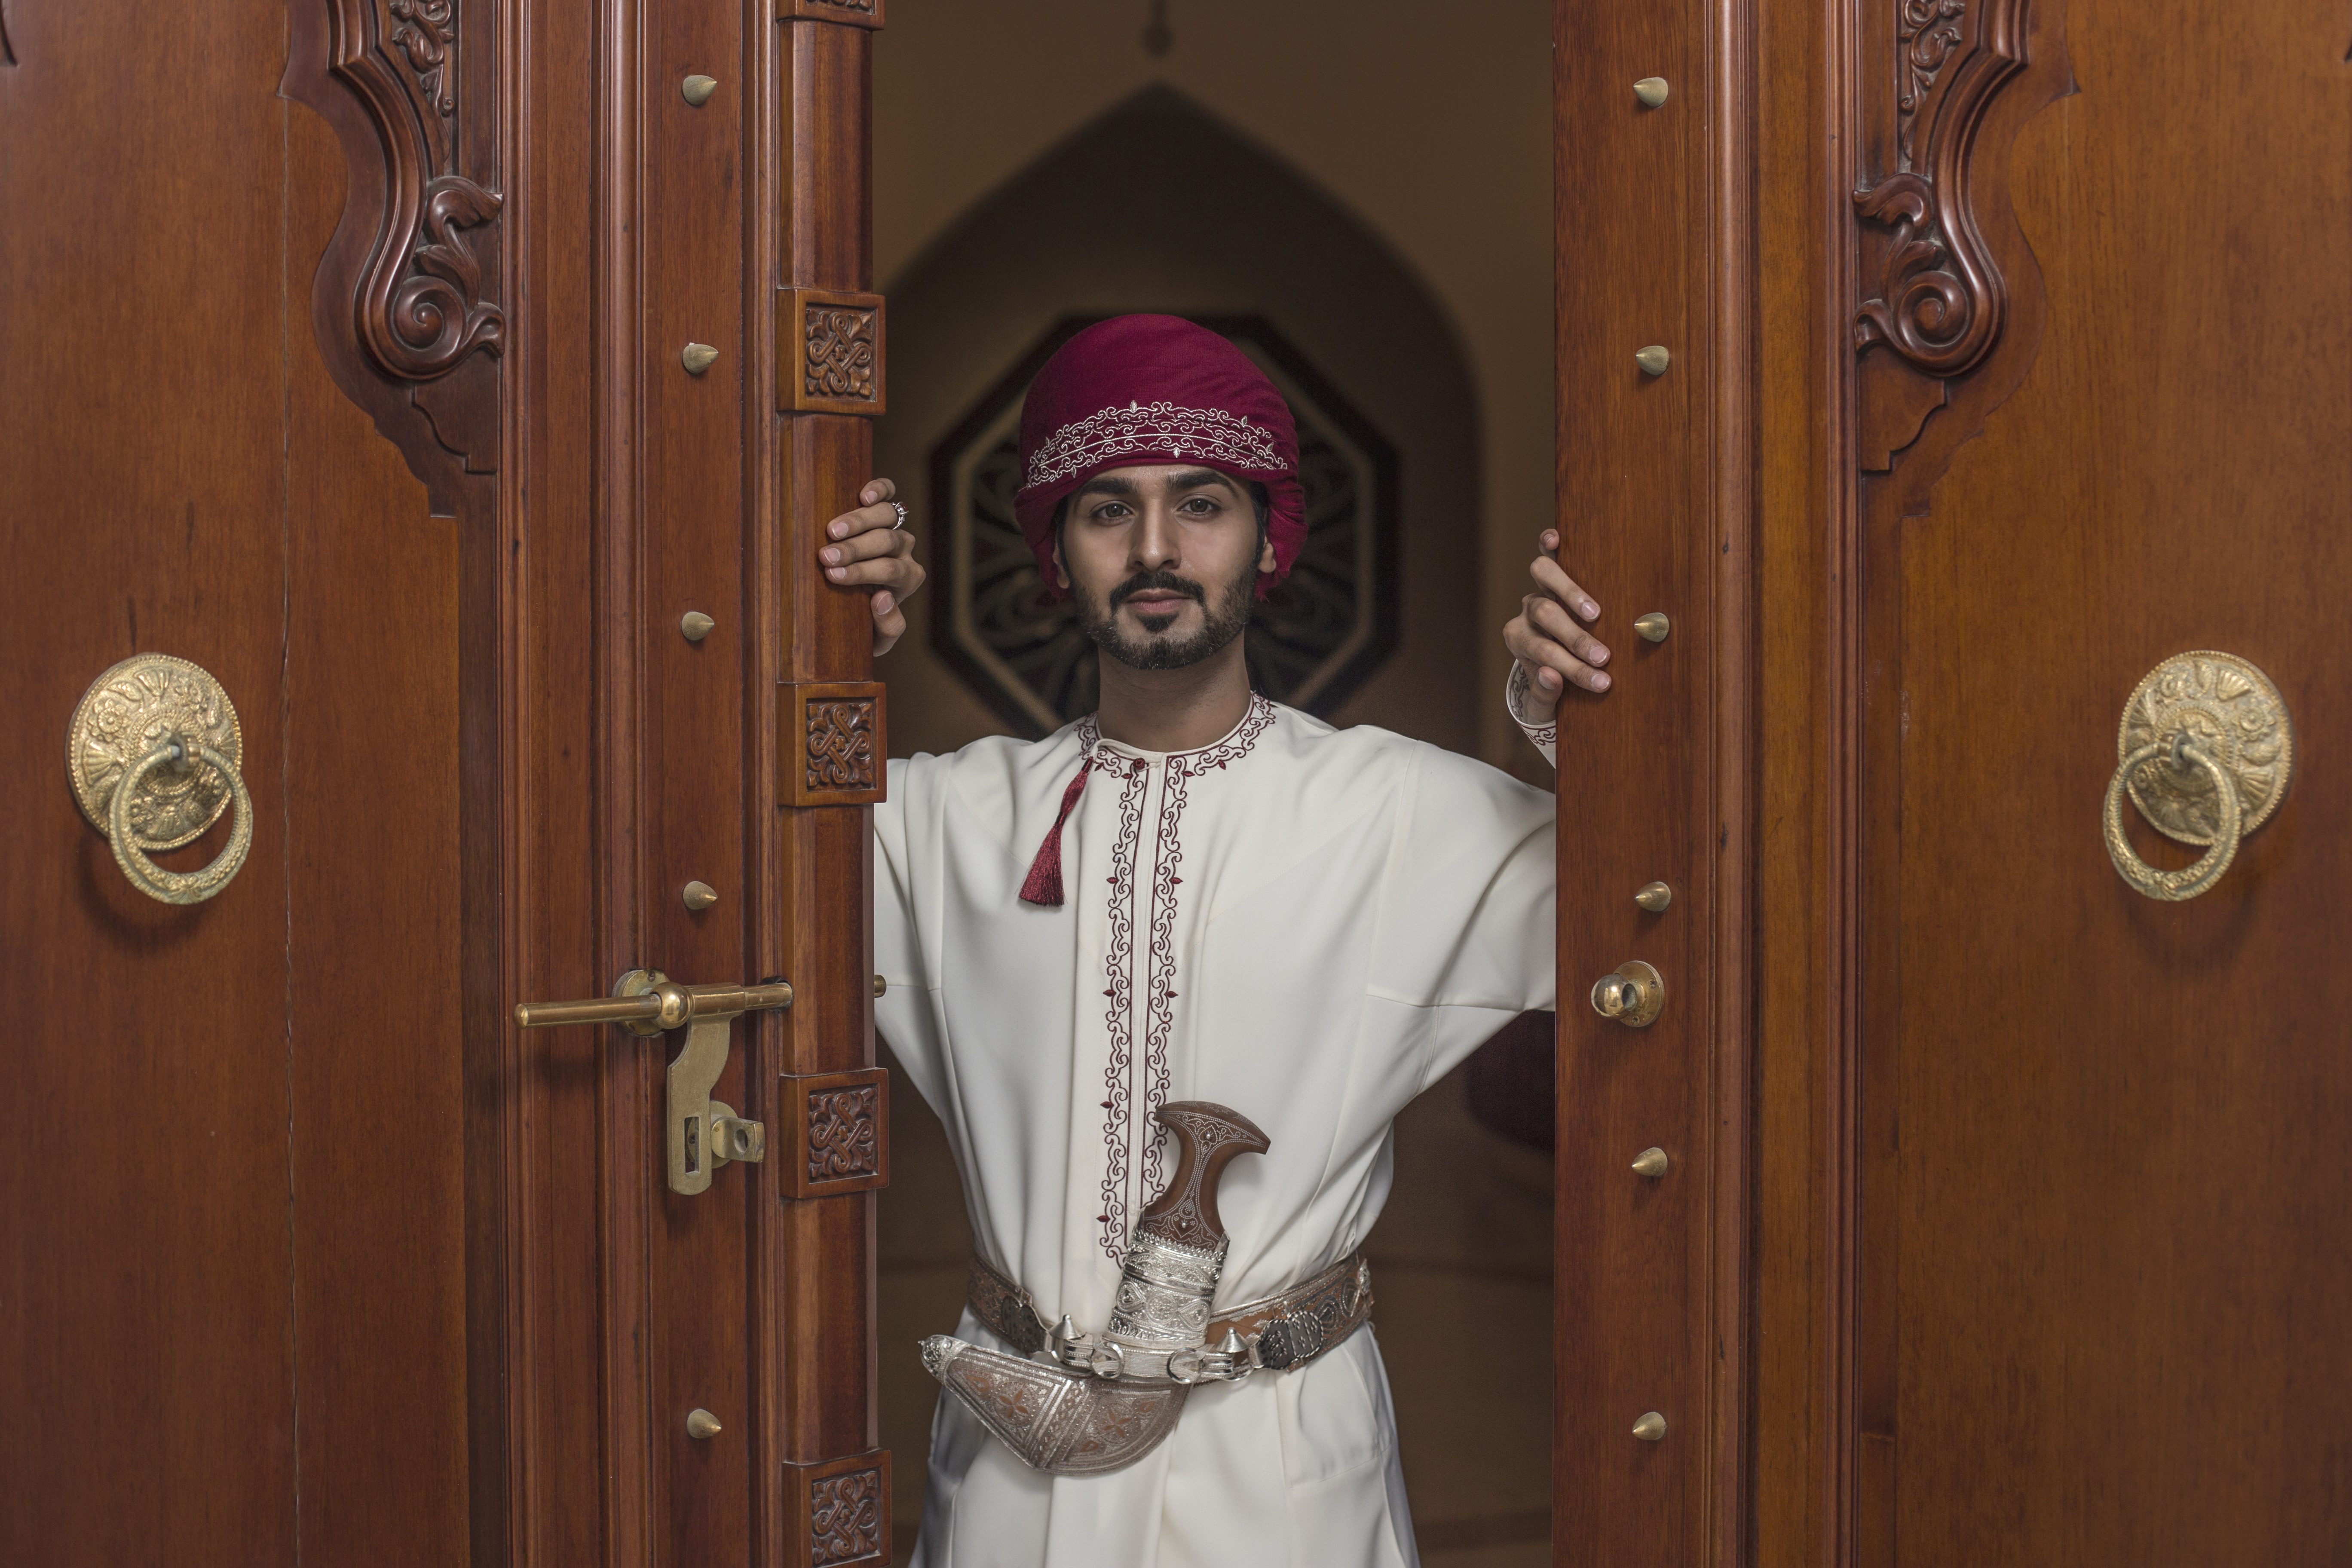 Oman fashion: Best place for Omani traditional dress